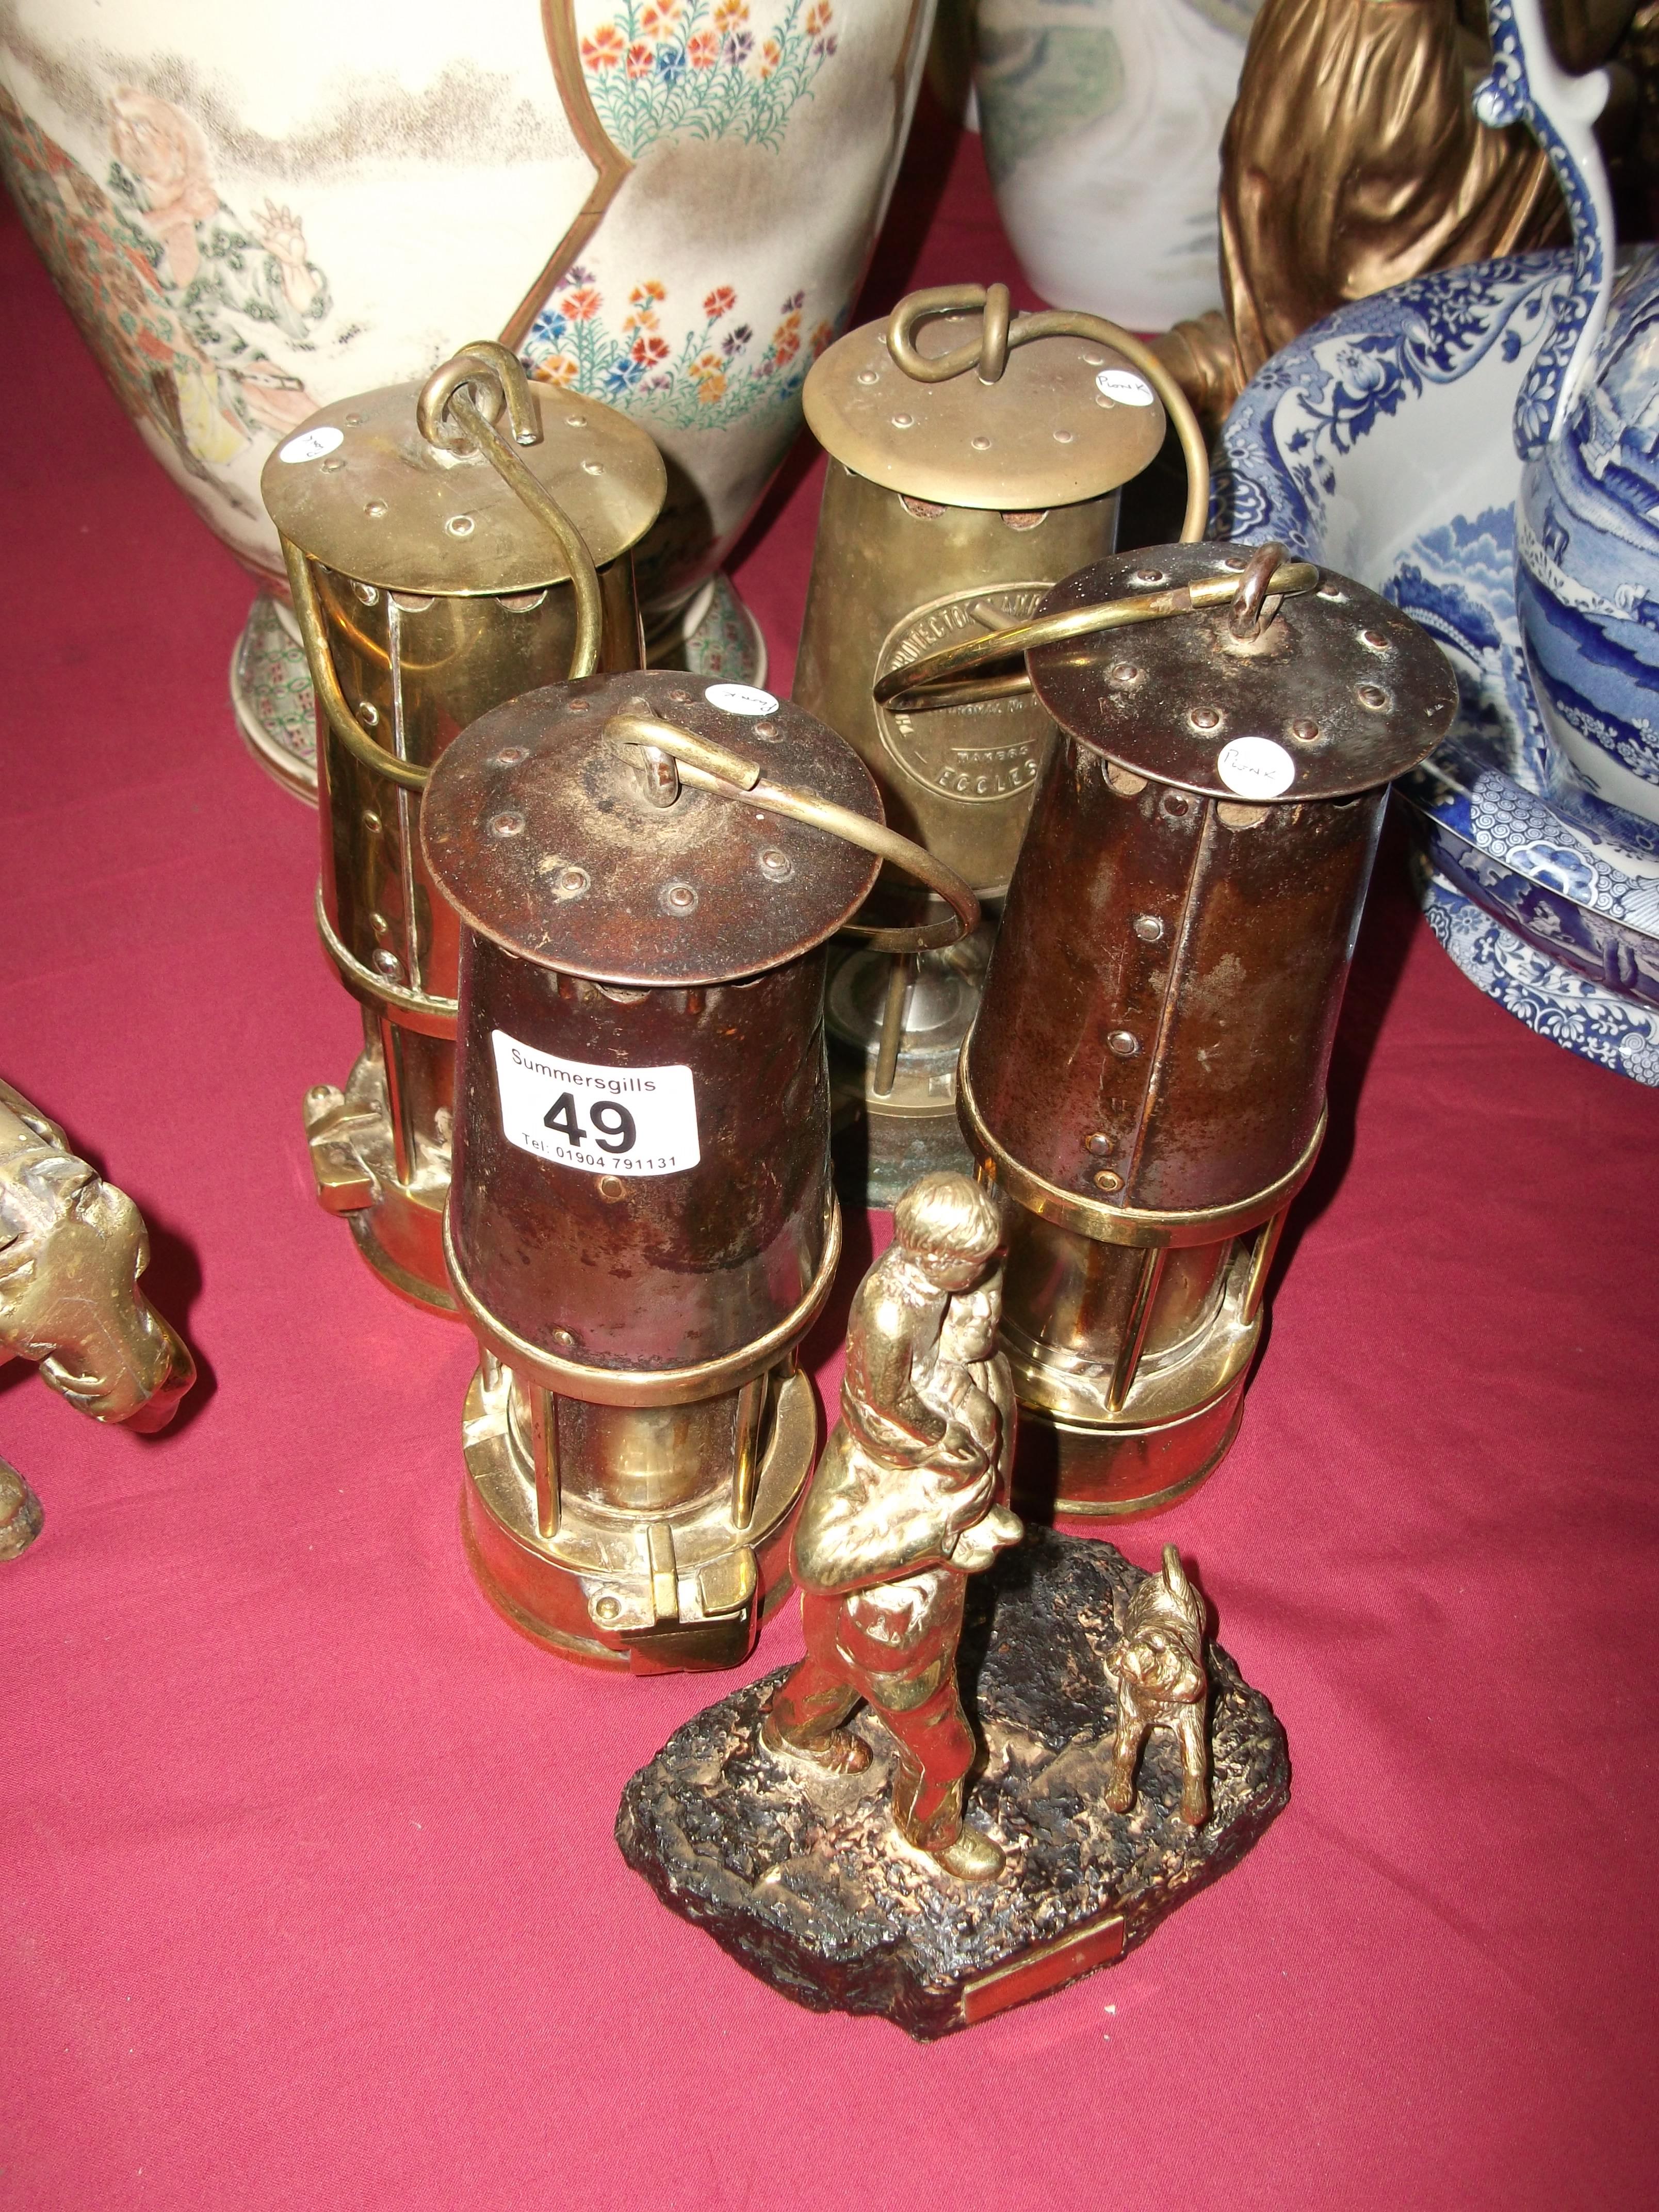 4 miners lamps + brass figure